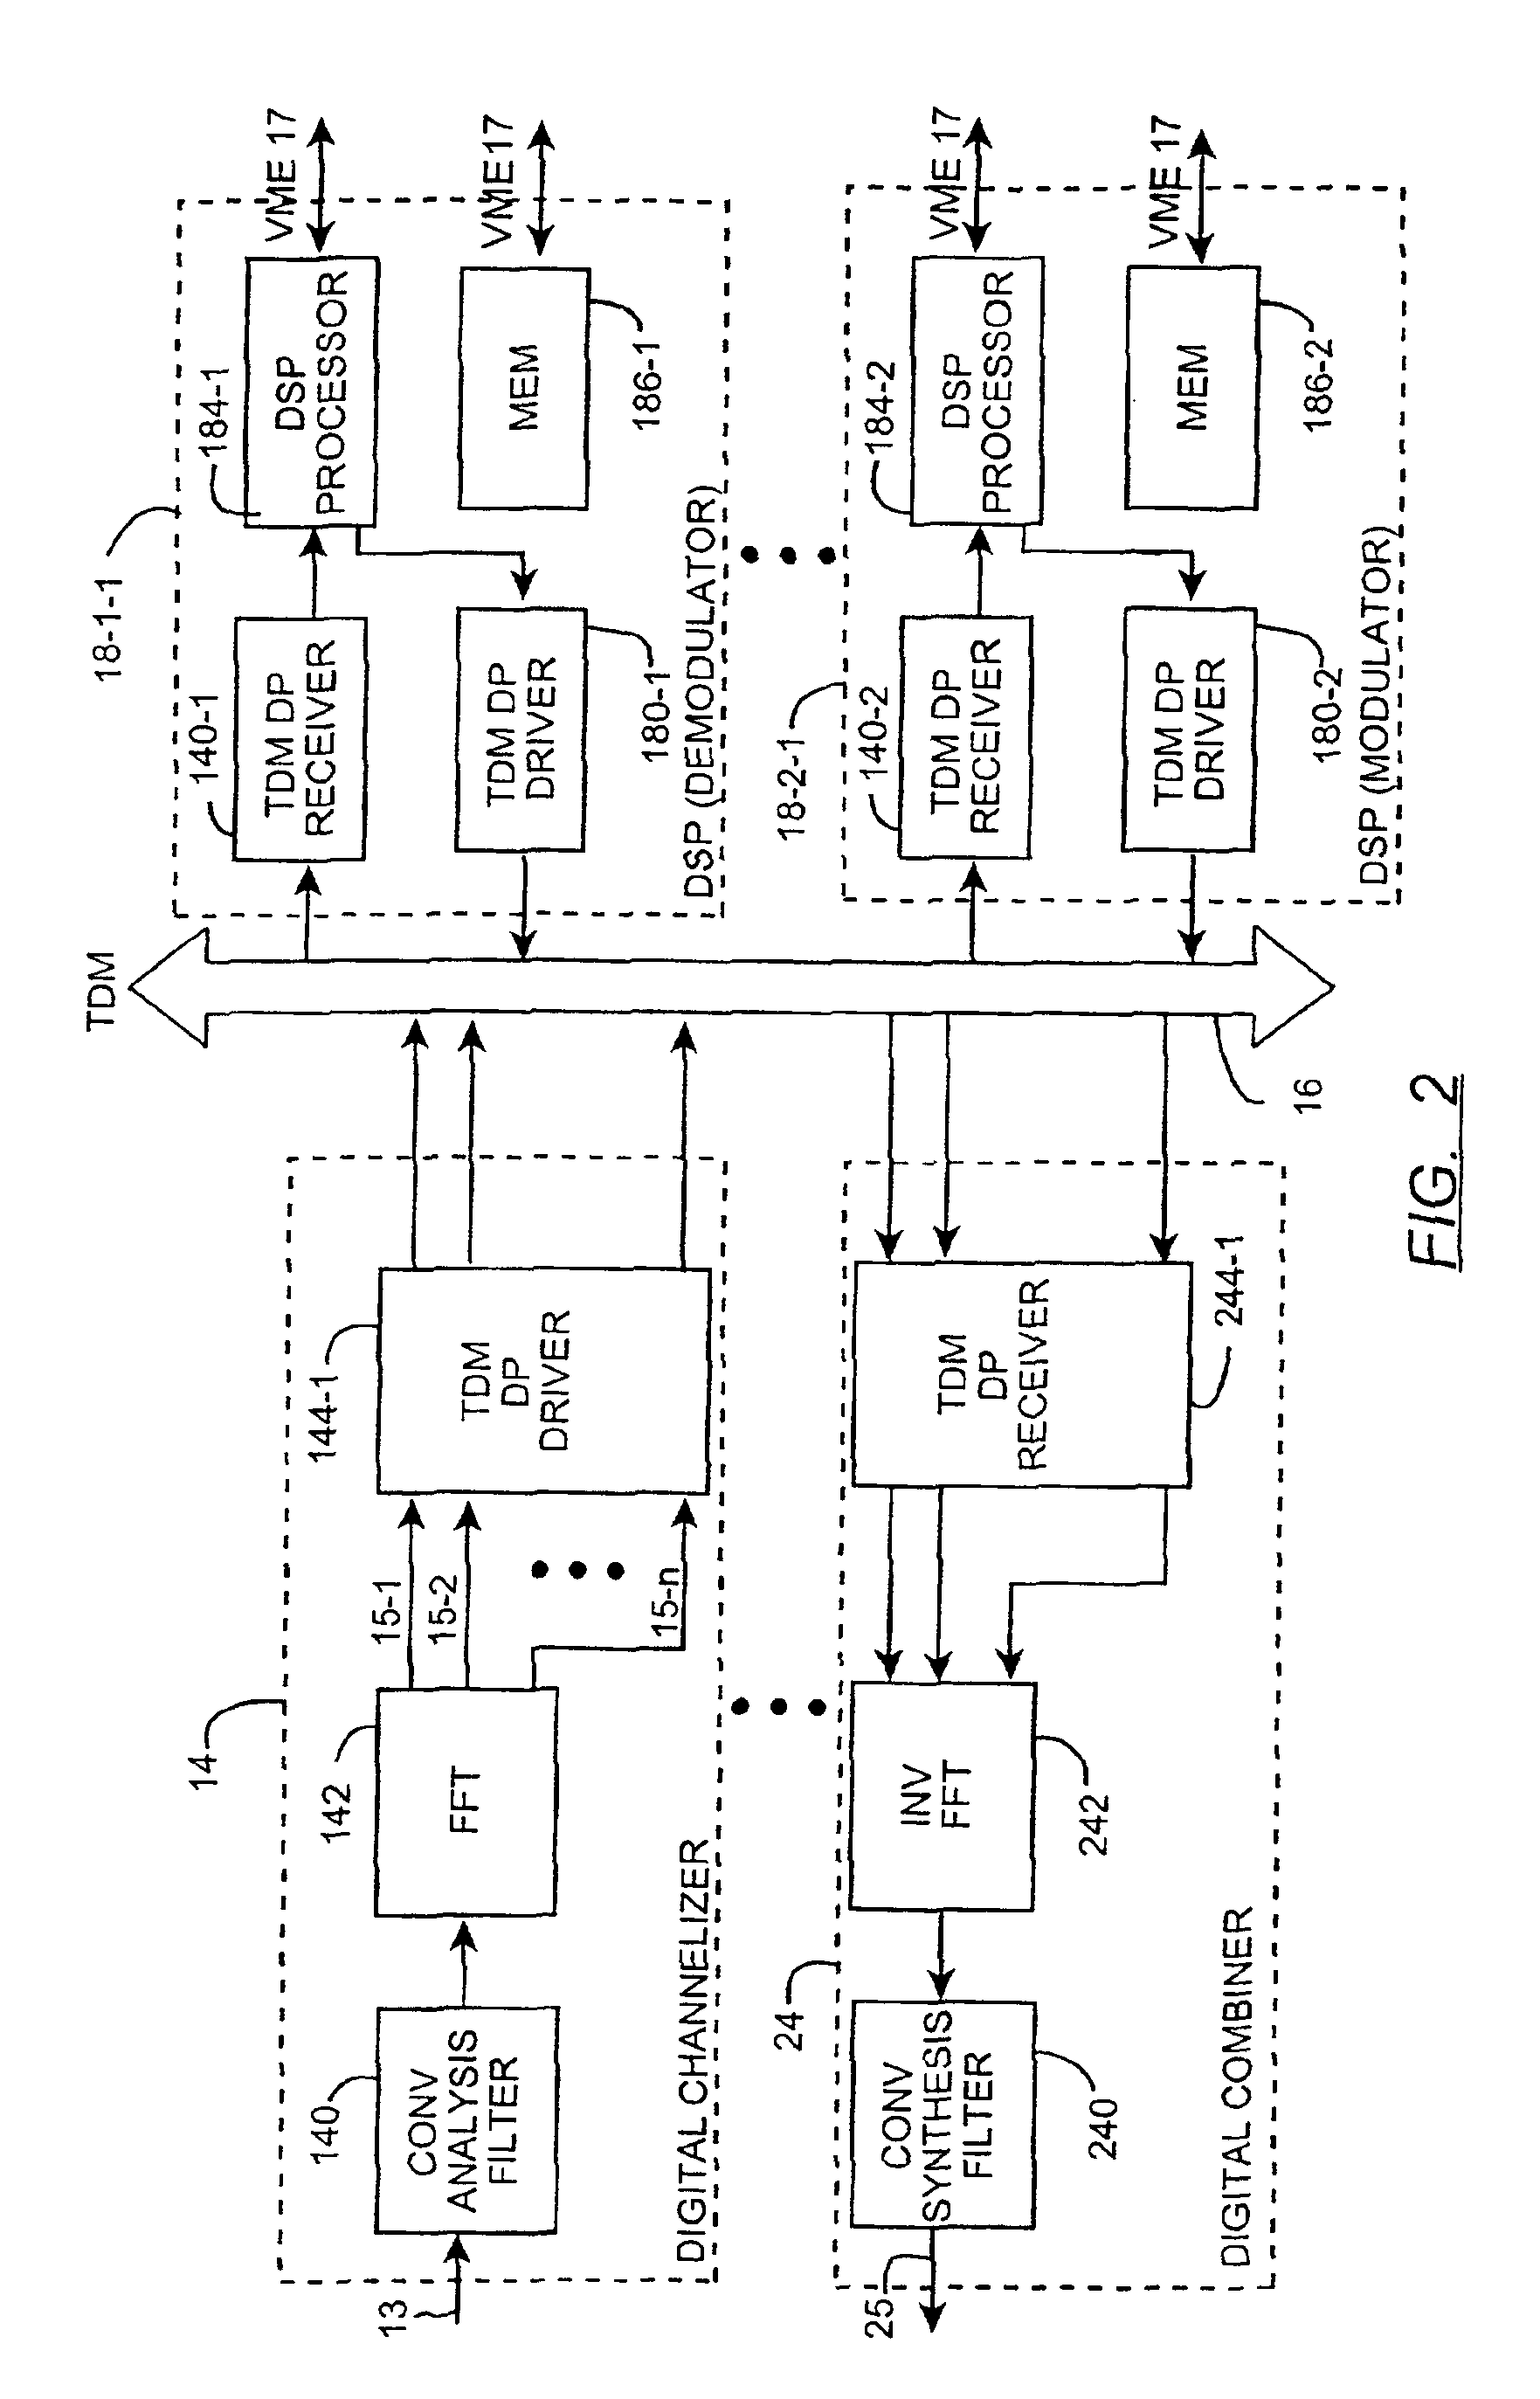 Method of baseband frequency hopping utilizing time division multiplexed mapping between a radio transceiver and digital signal processing resources